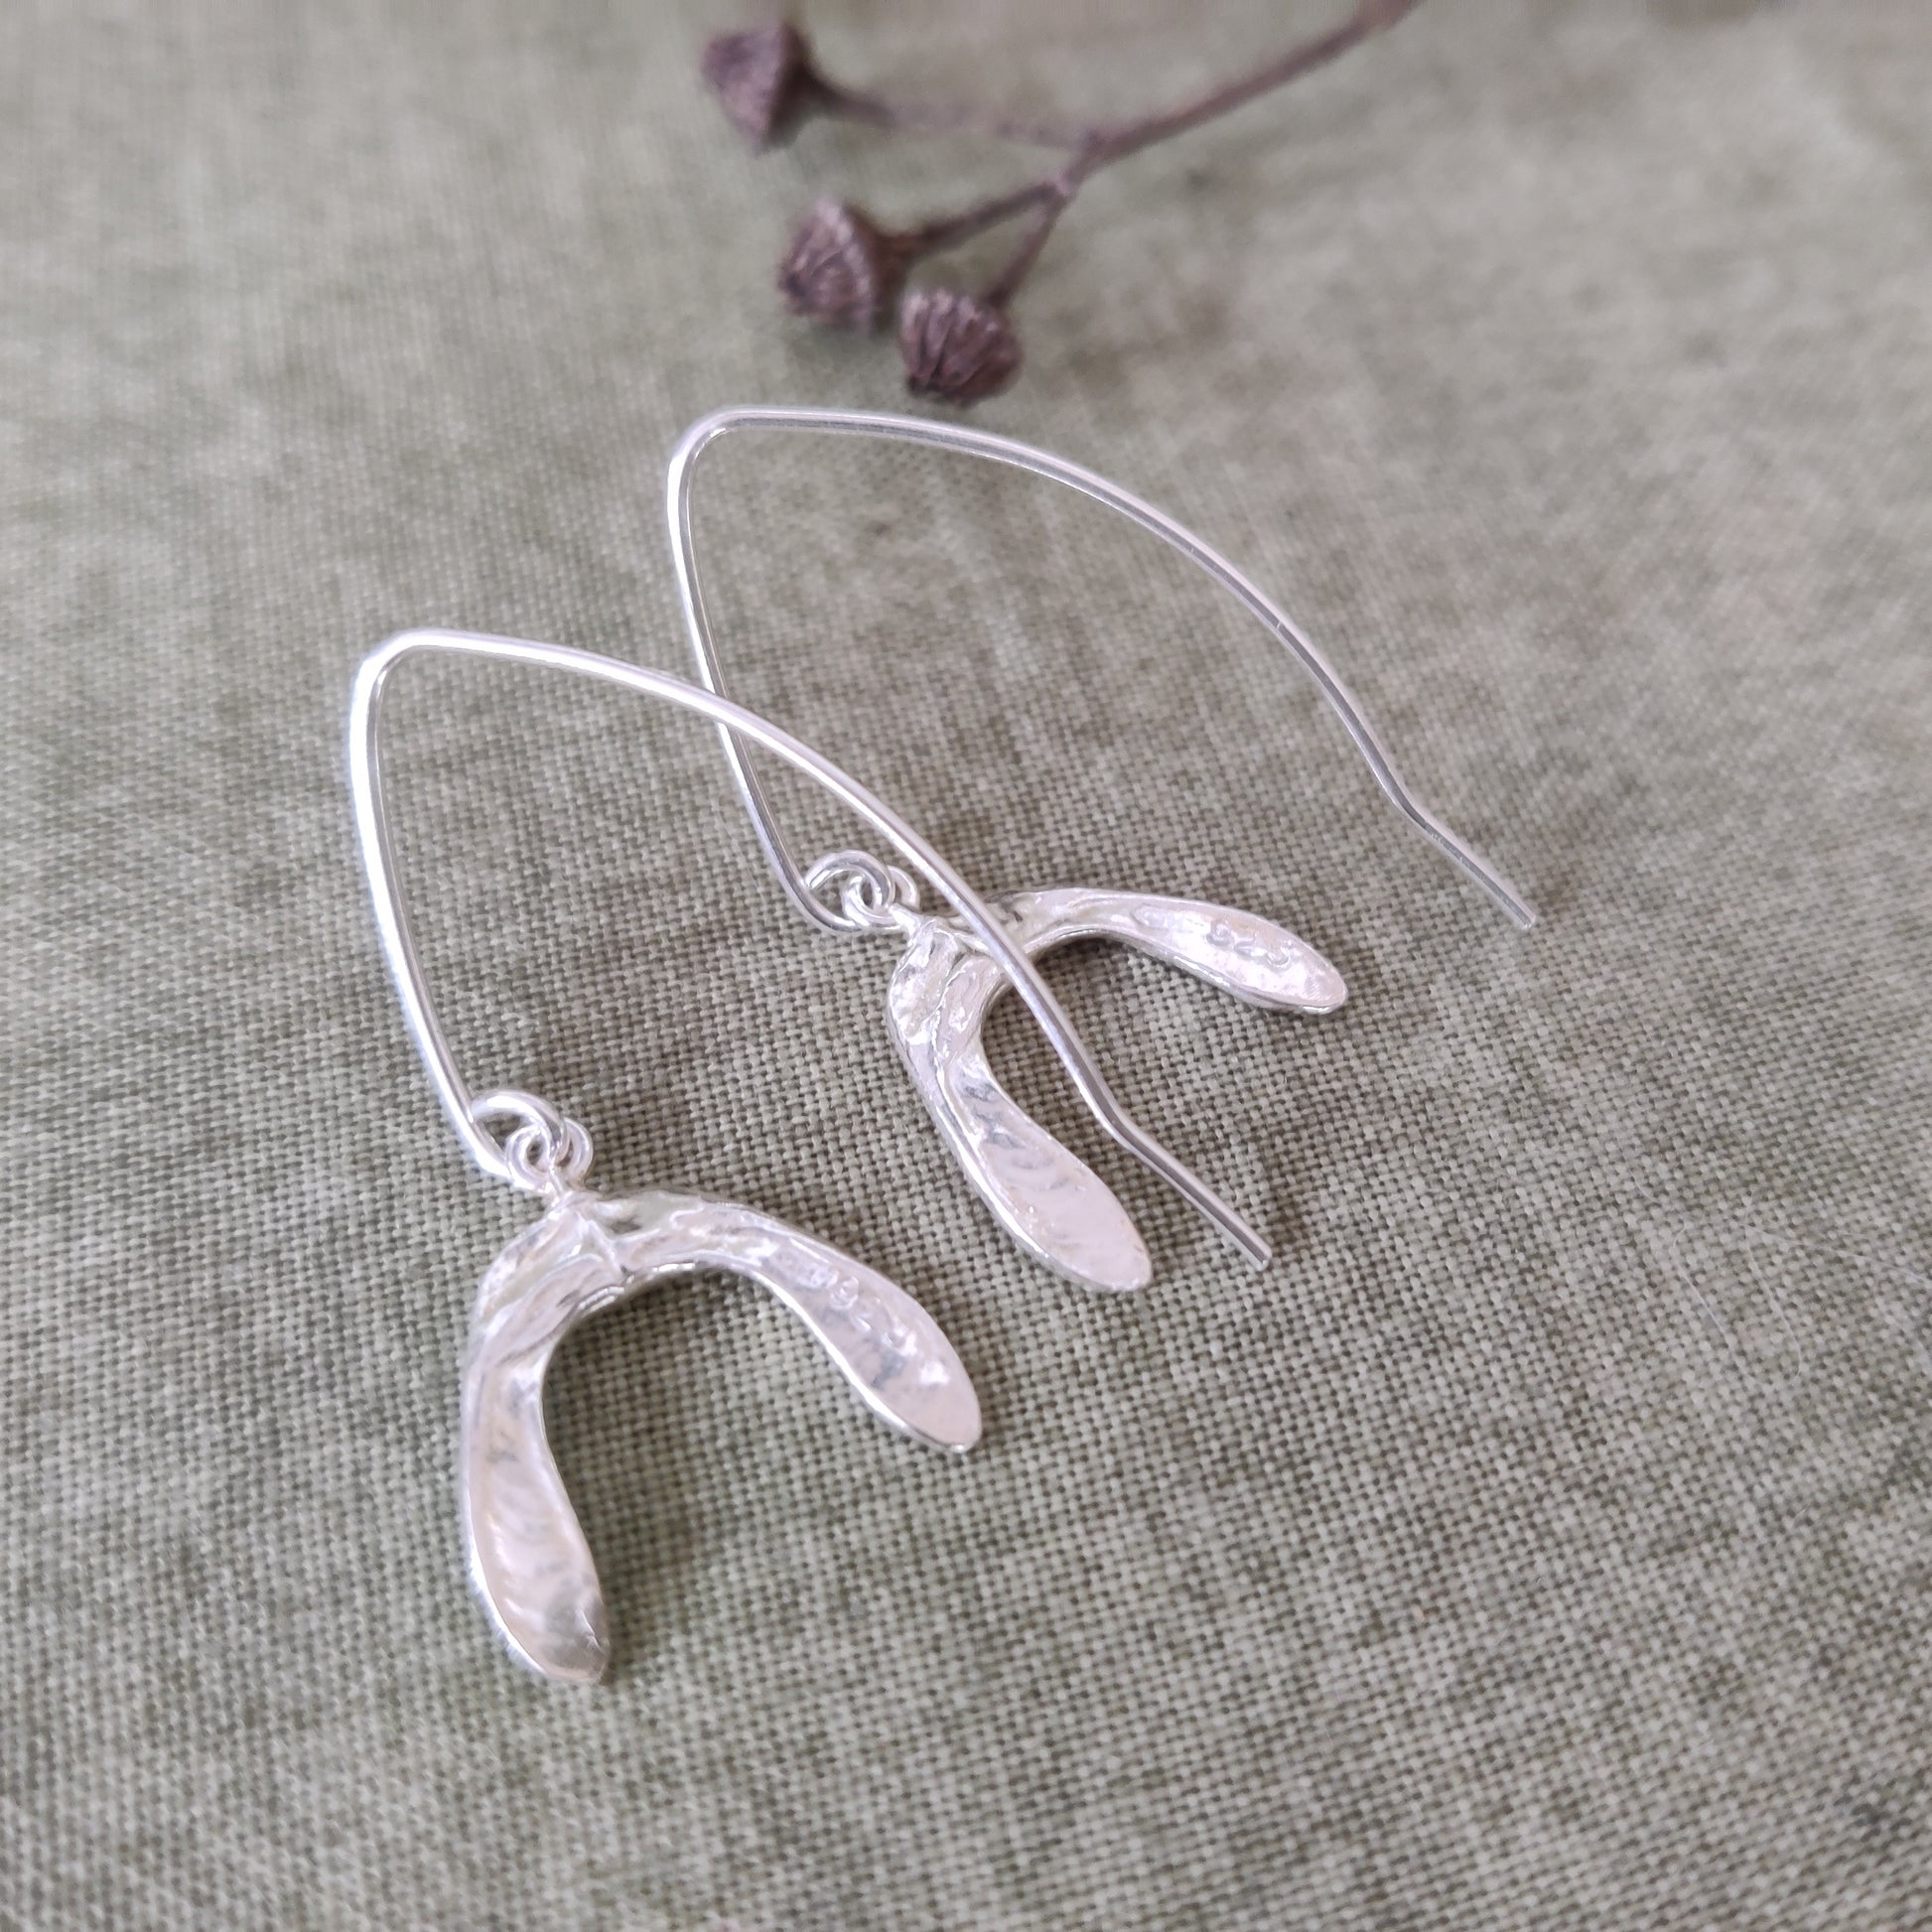 Sycamore silver drop earrings by Notion Jewellery